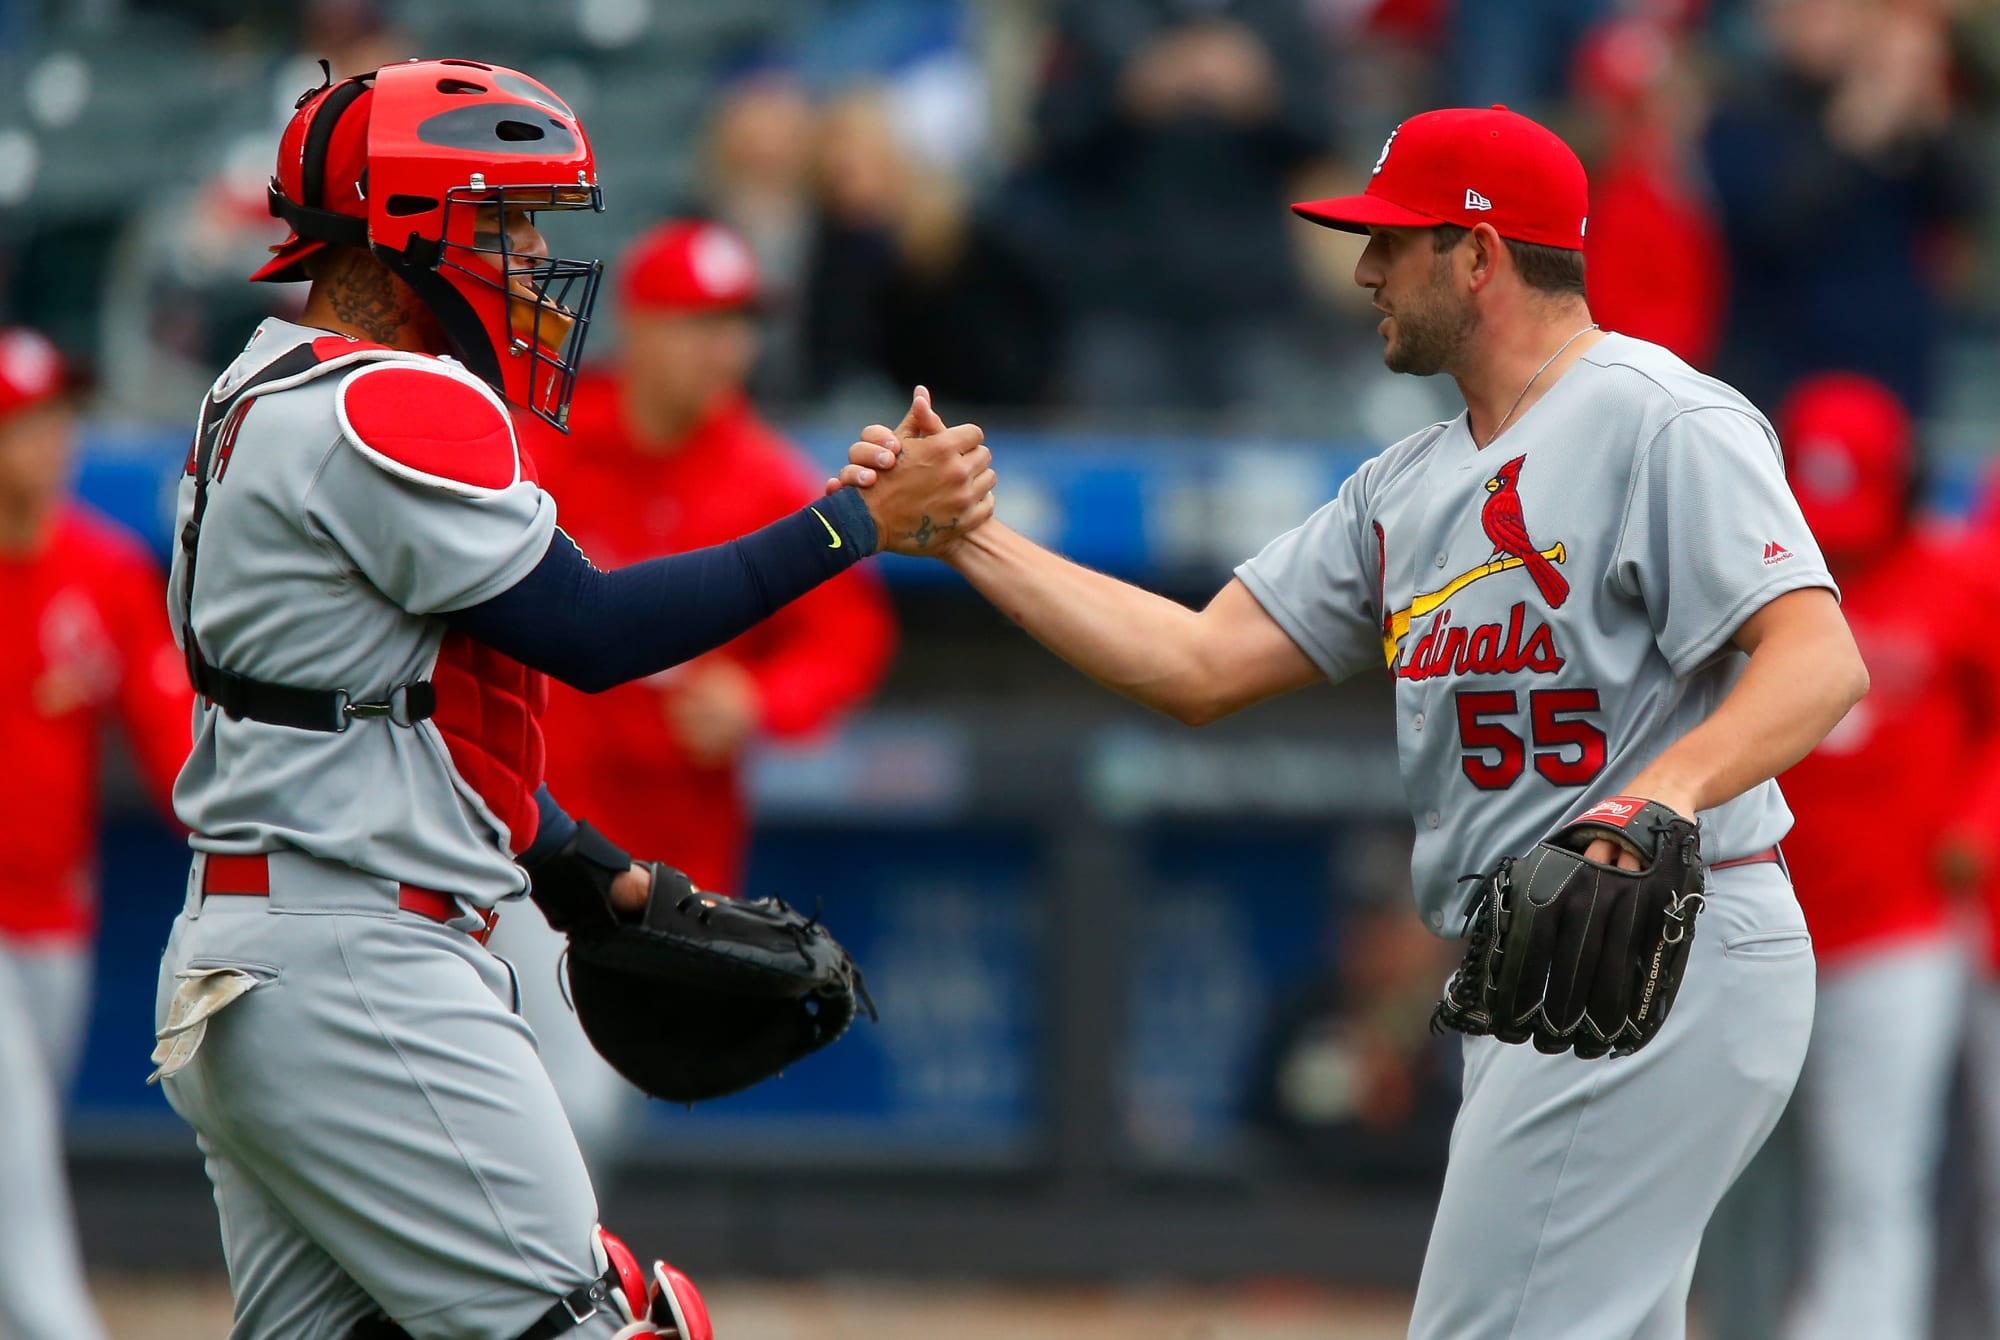 St. Louis Cardinals: The week that was according to us